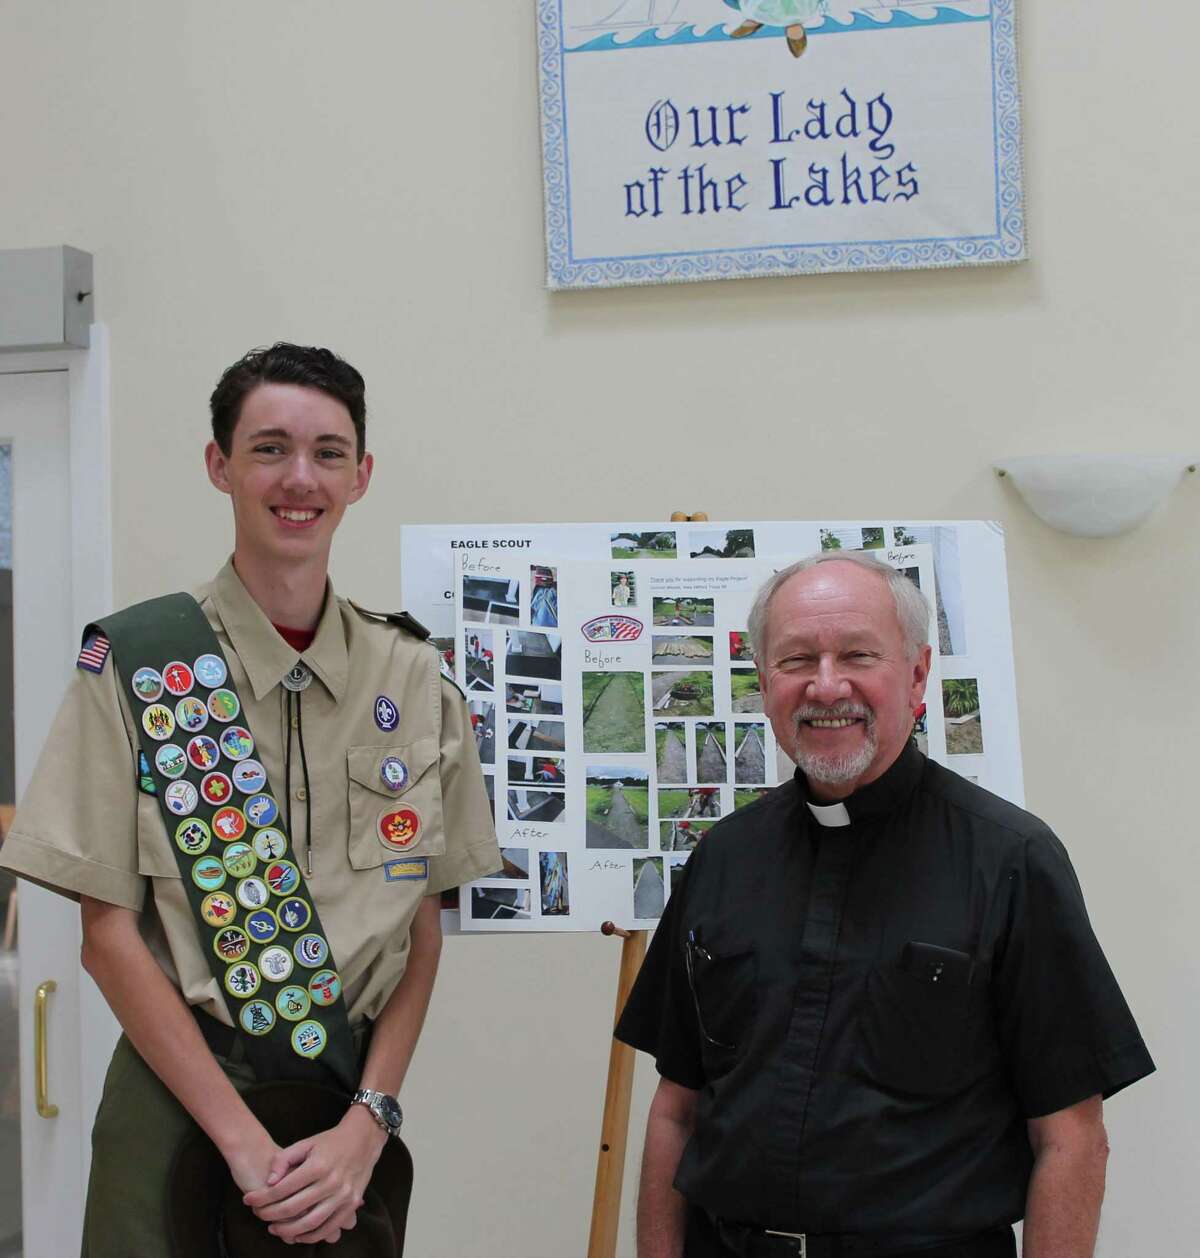 Connor Woods is shown with the Rev. Gerald H. Dziedzic, pastor of Our Lady of the Lakes, standing in the vestibule of the church. Connor created the “Thank you” poster for the church as part of his Eagle Scout project.